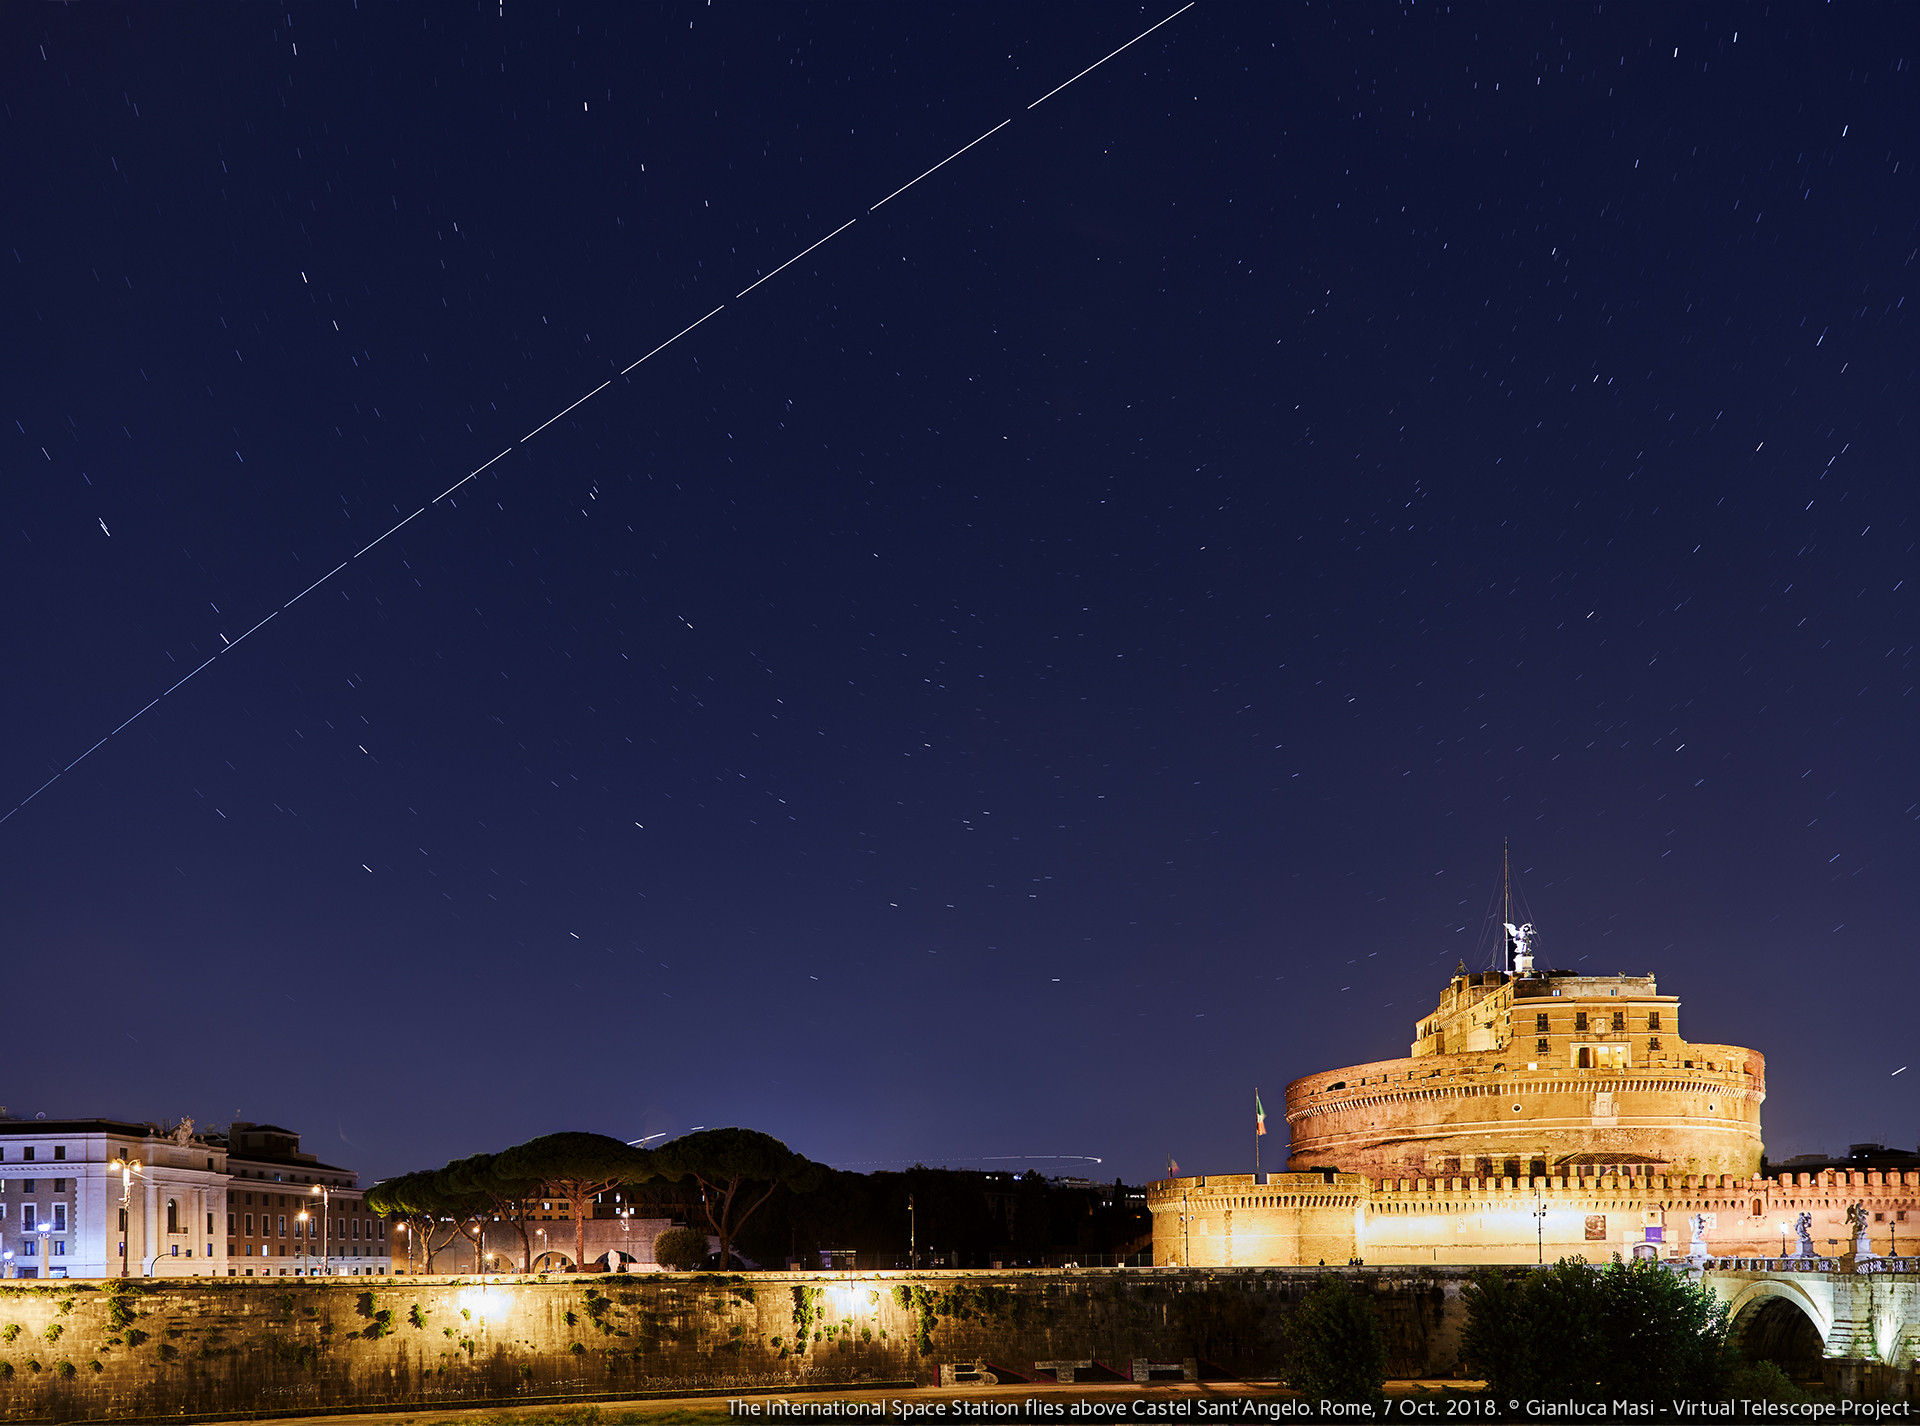 The International Space Station crosses the sky above Castel Sant’Angelo in Rome. 7 Oct. 2018.